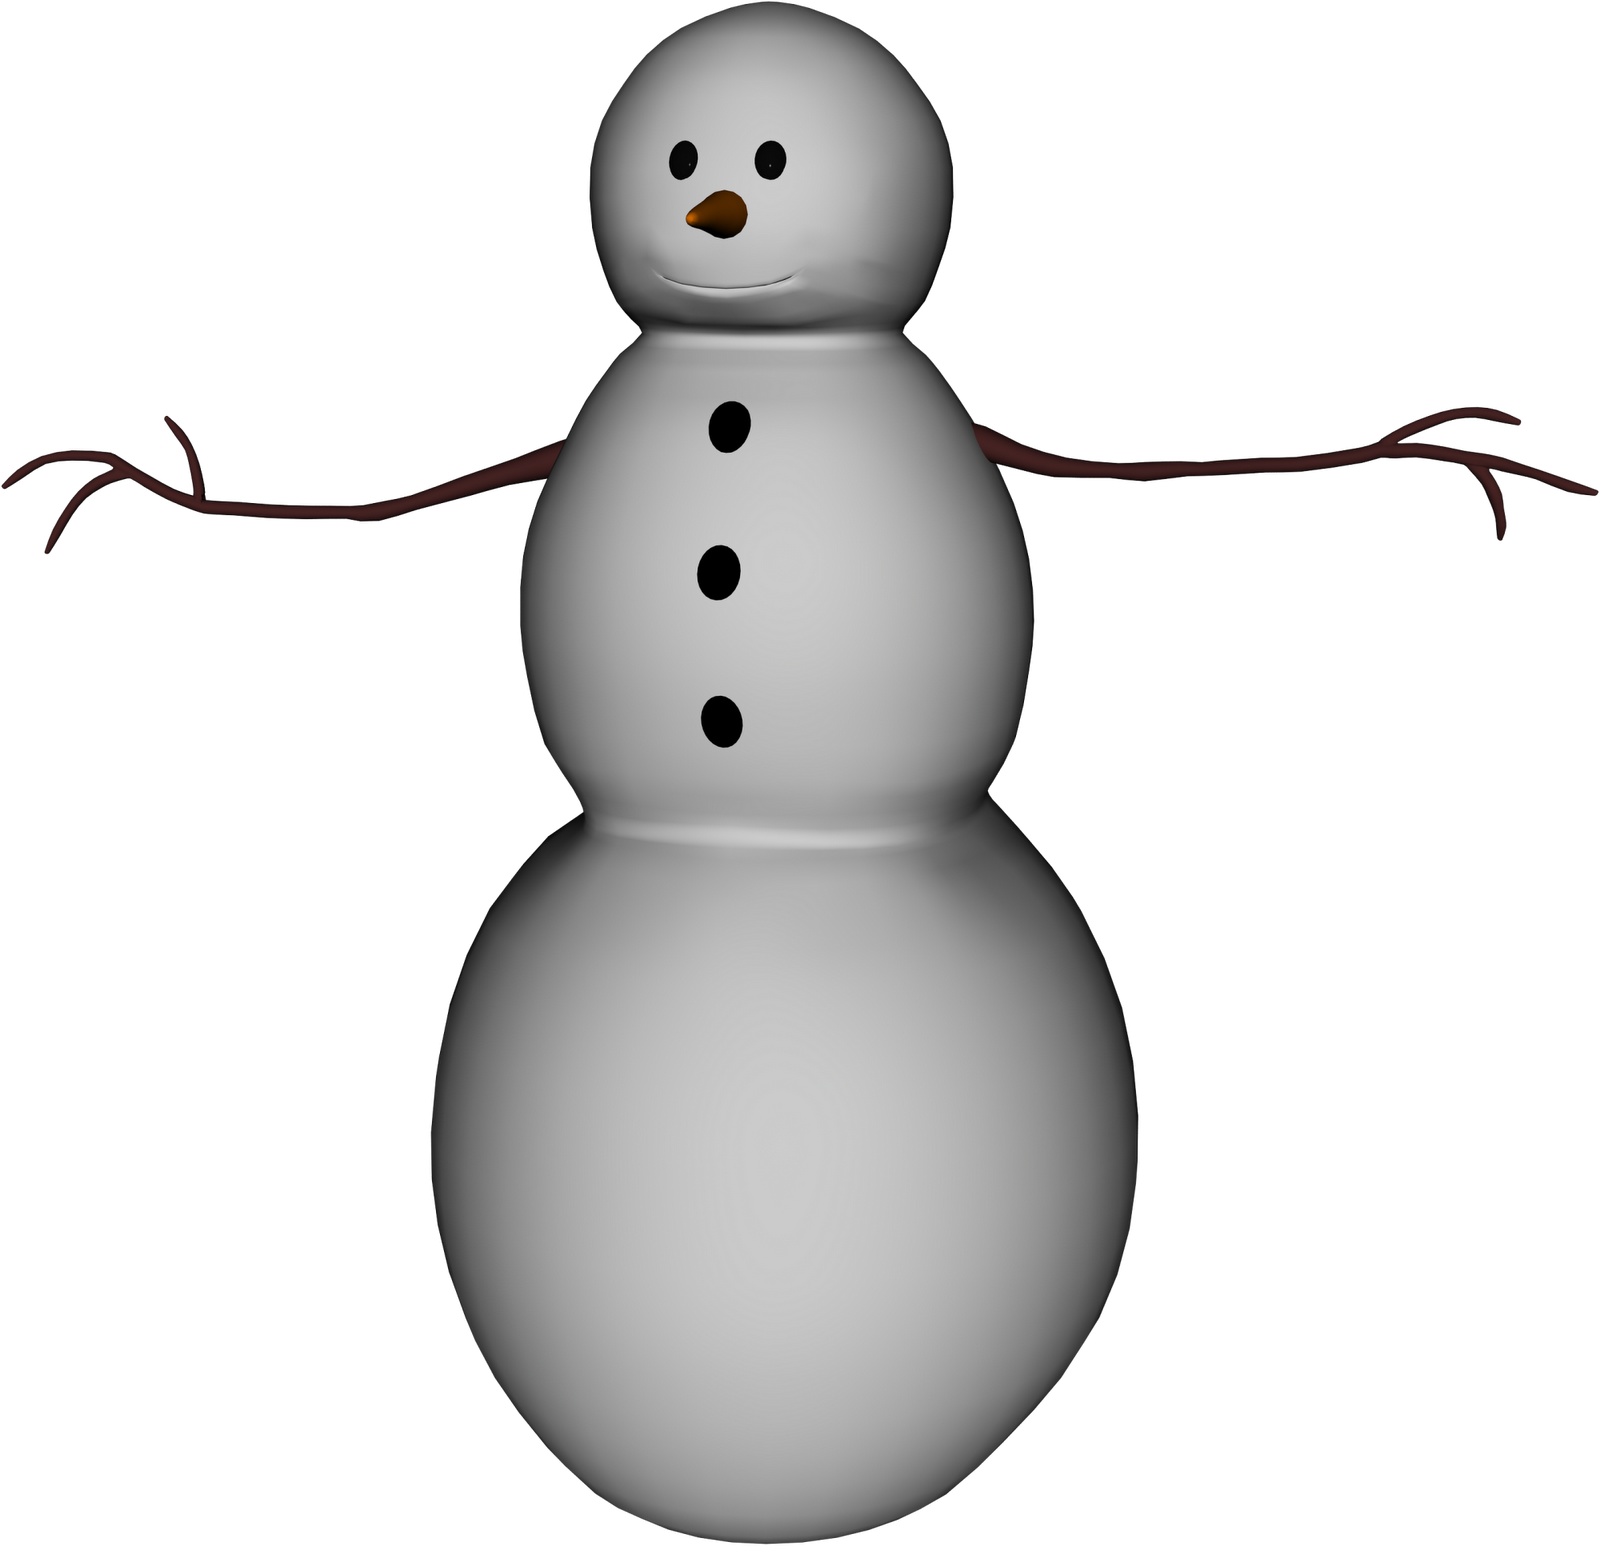  collection of skinny. Faces clipart snowmen